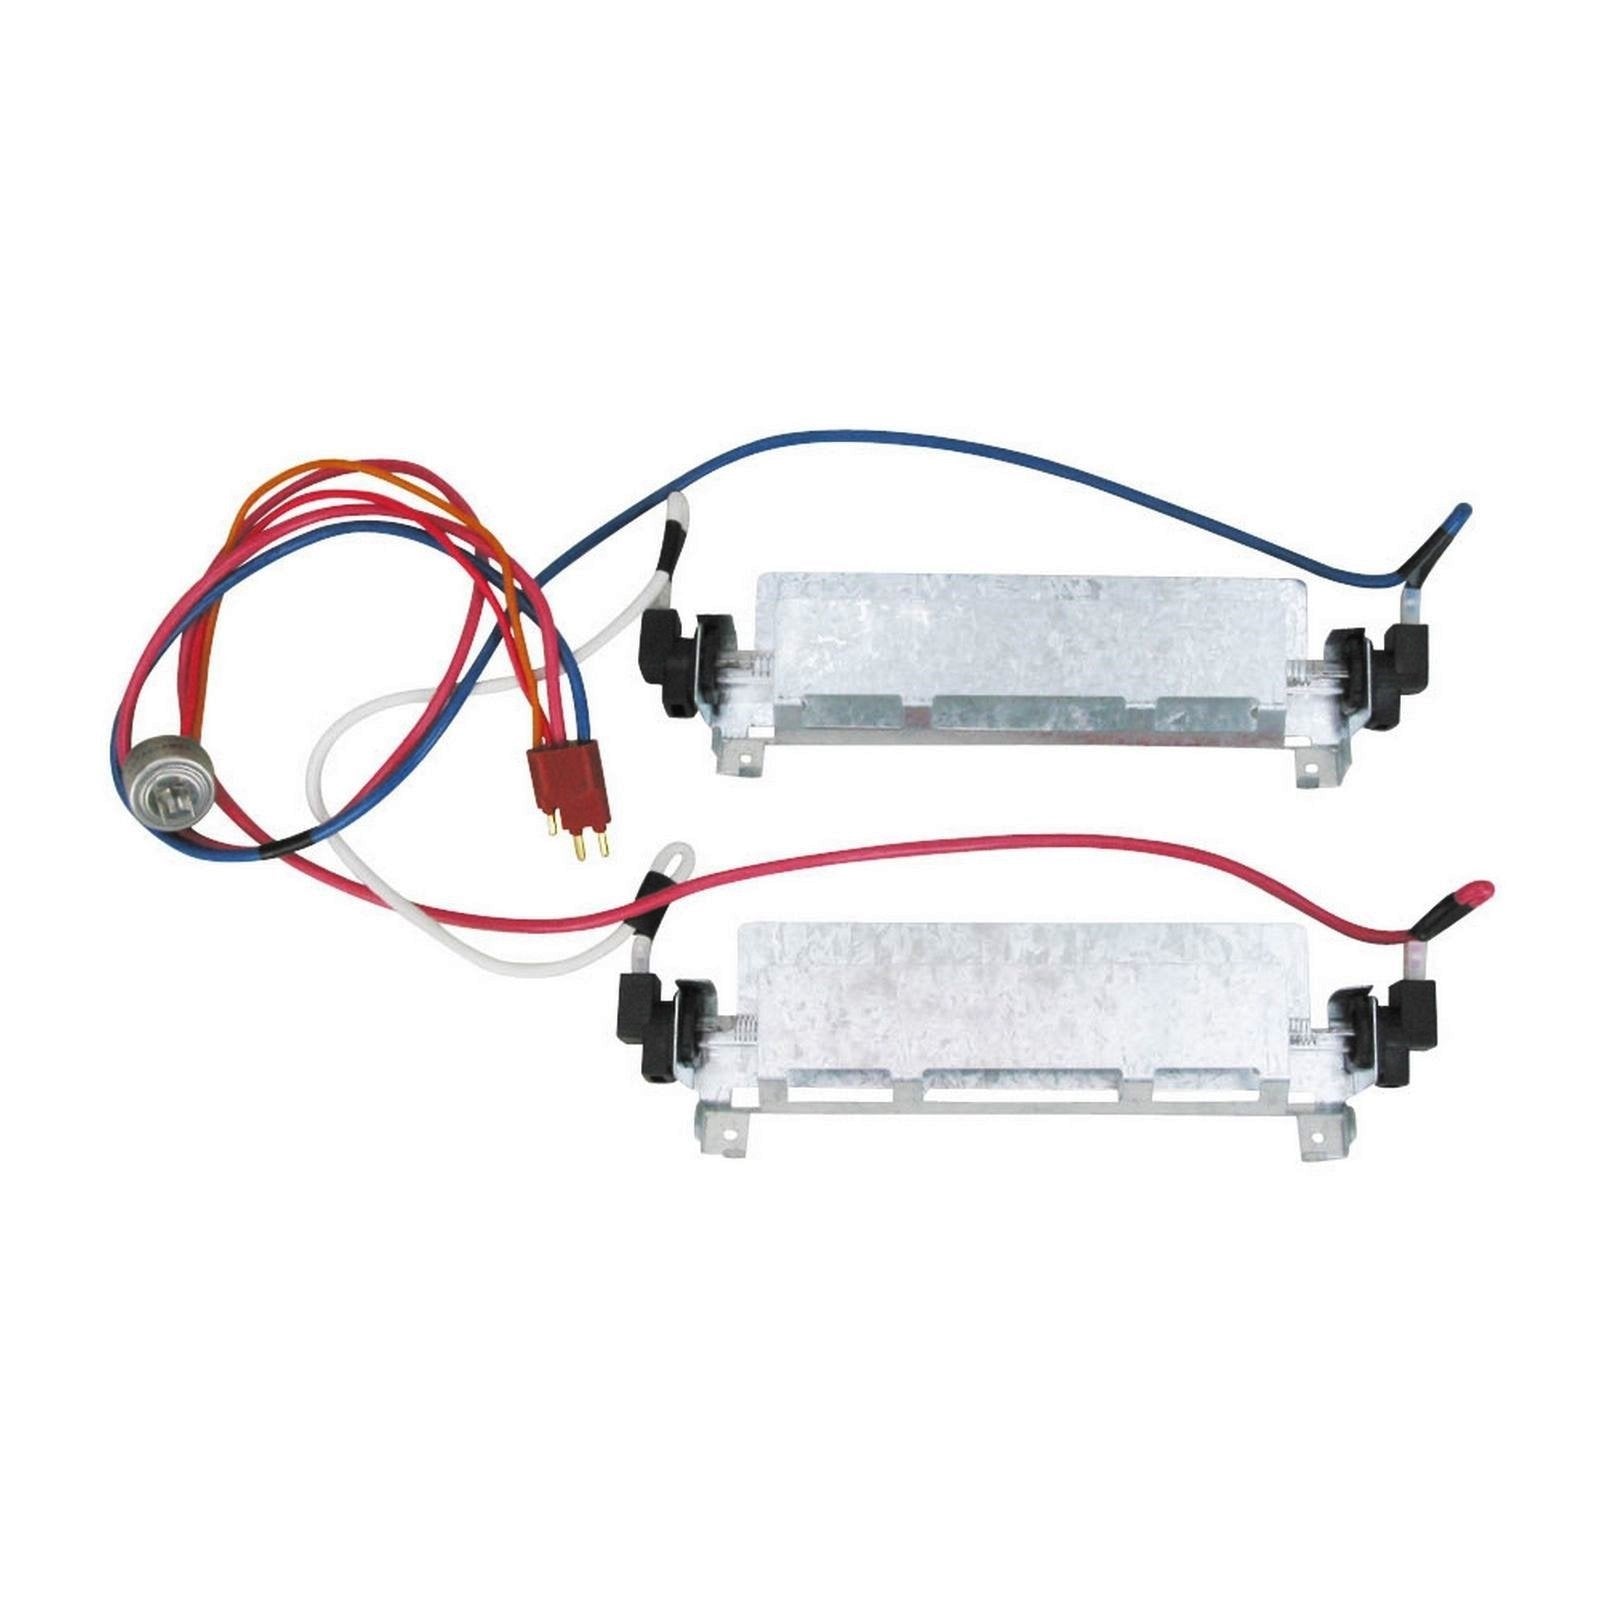 ERWR51X442 Defrost Heater for refrigerators Replaces WR51X442